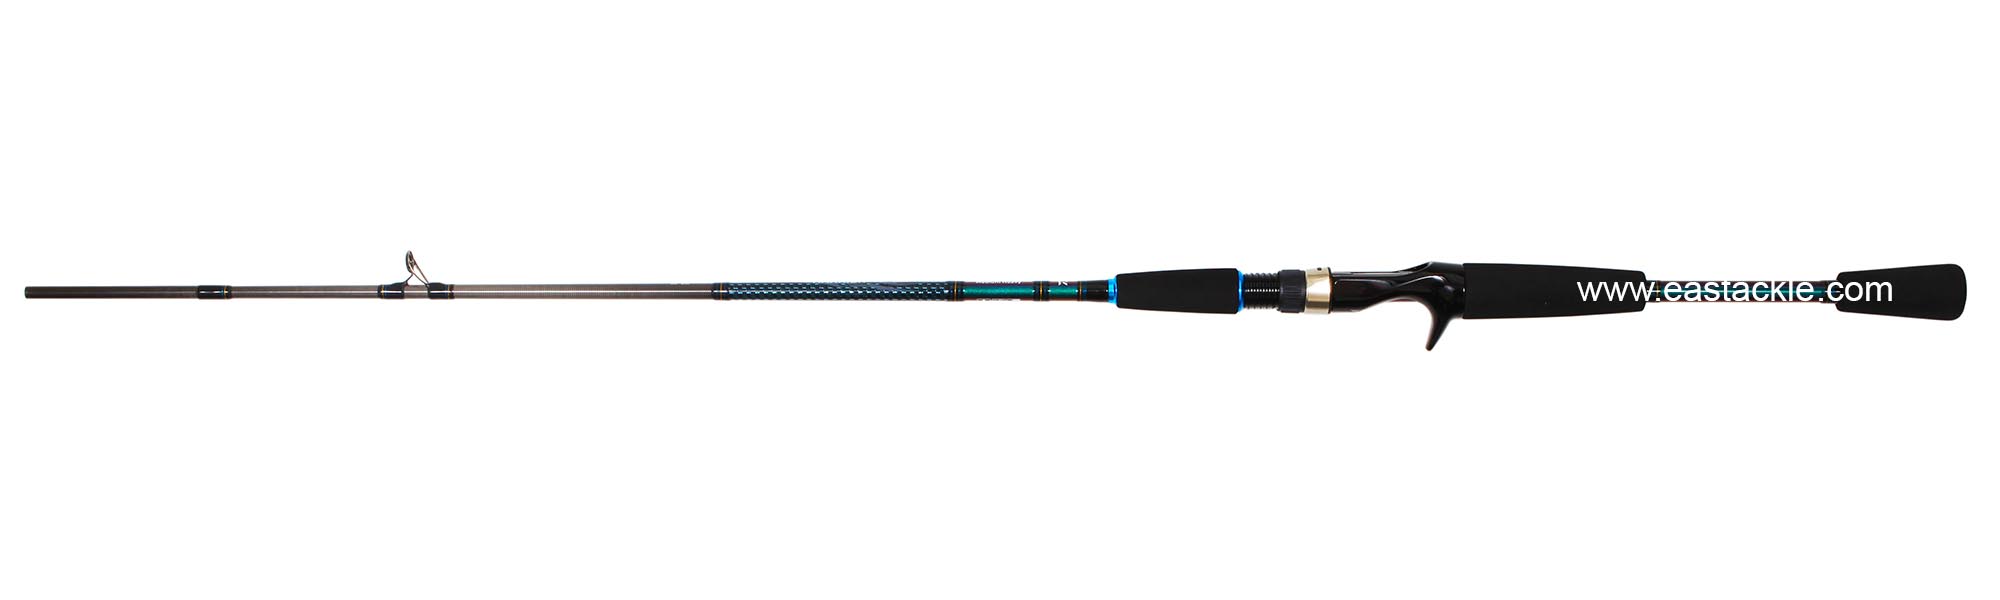 Daiwa - Harrier  - 602MB-SD - Bait Casting Rod - Butt to Stripper Guide Section (Side View) | Eastackle 